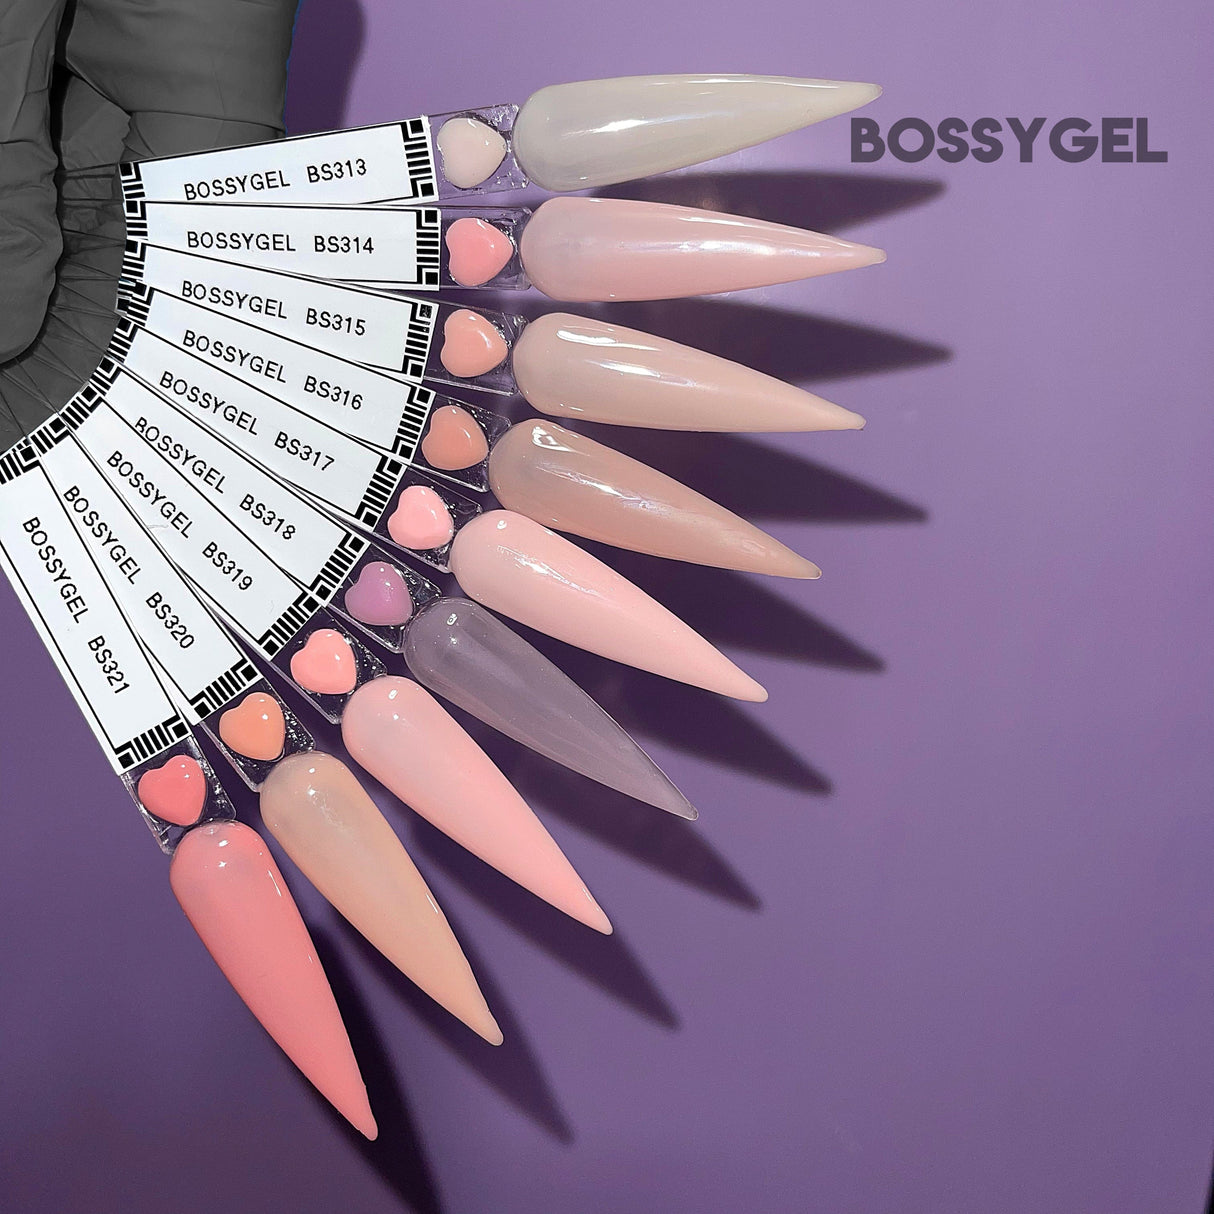 Bossy Gel BARE NUDE Collection with FREE 1 Heart 3D Silicone Mold (ONLINE ONLY!!!)